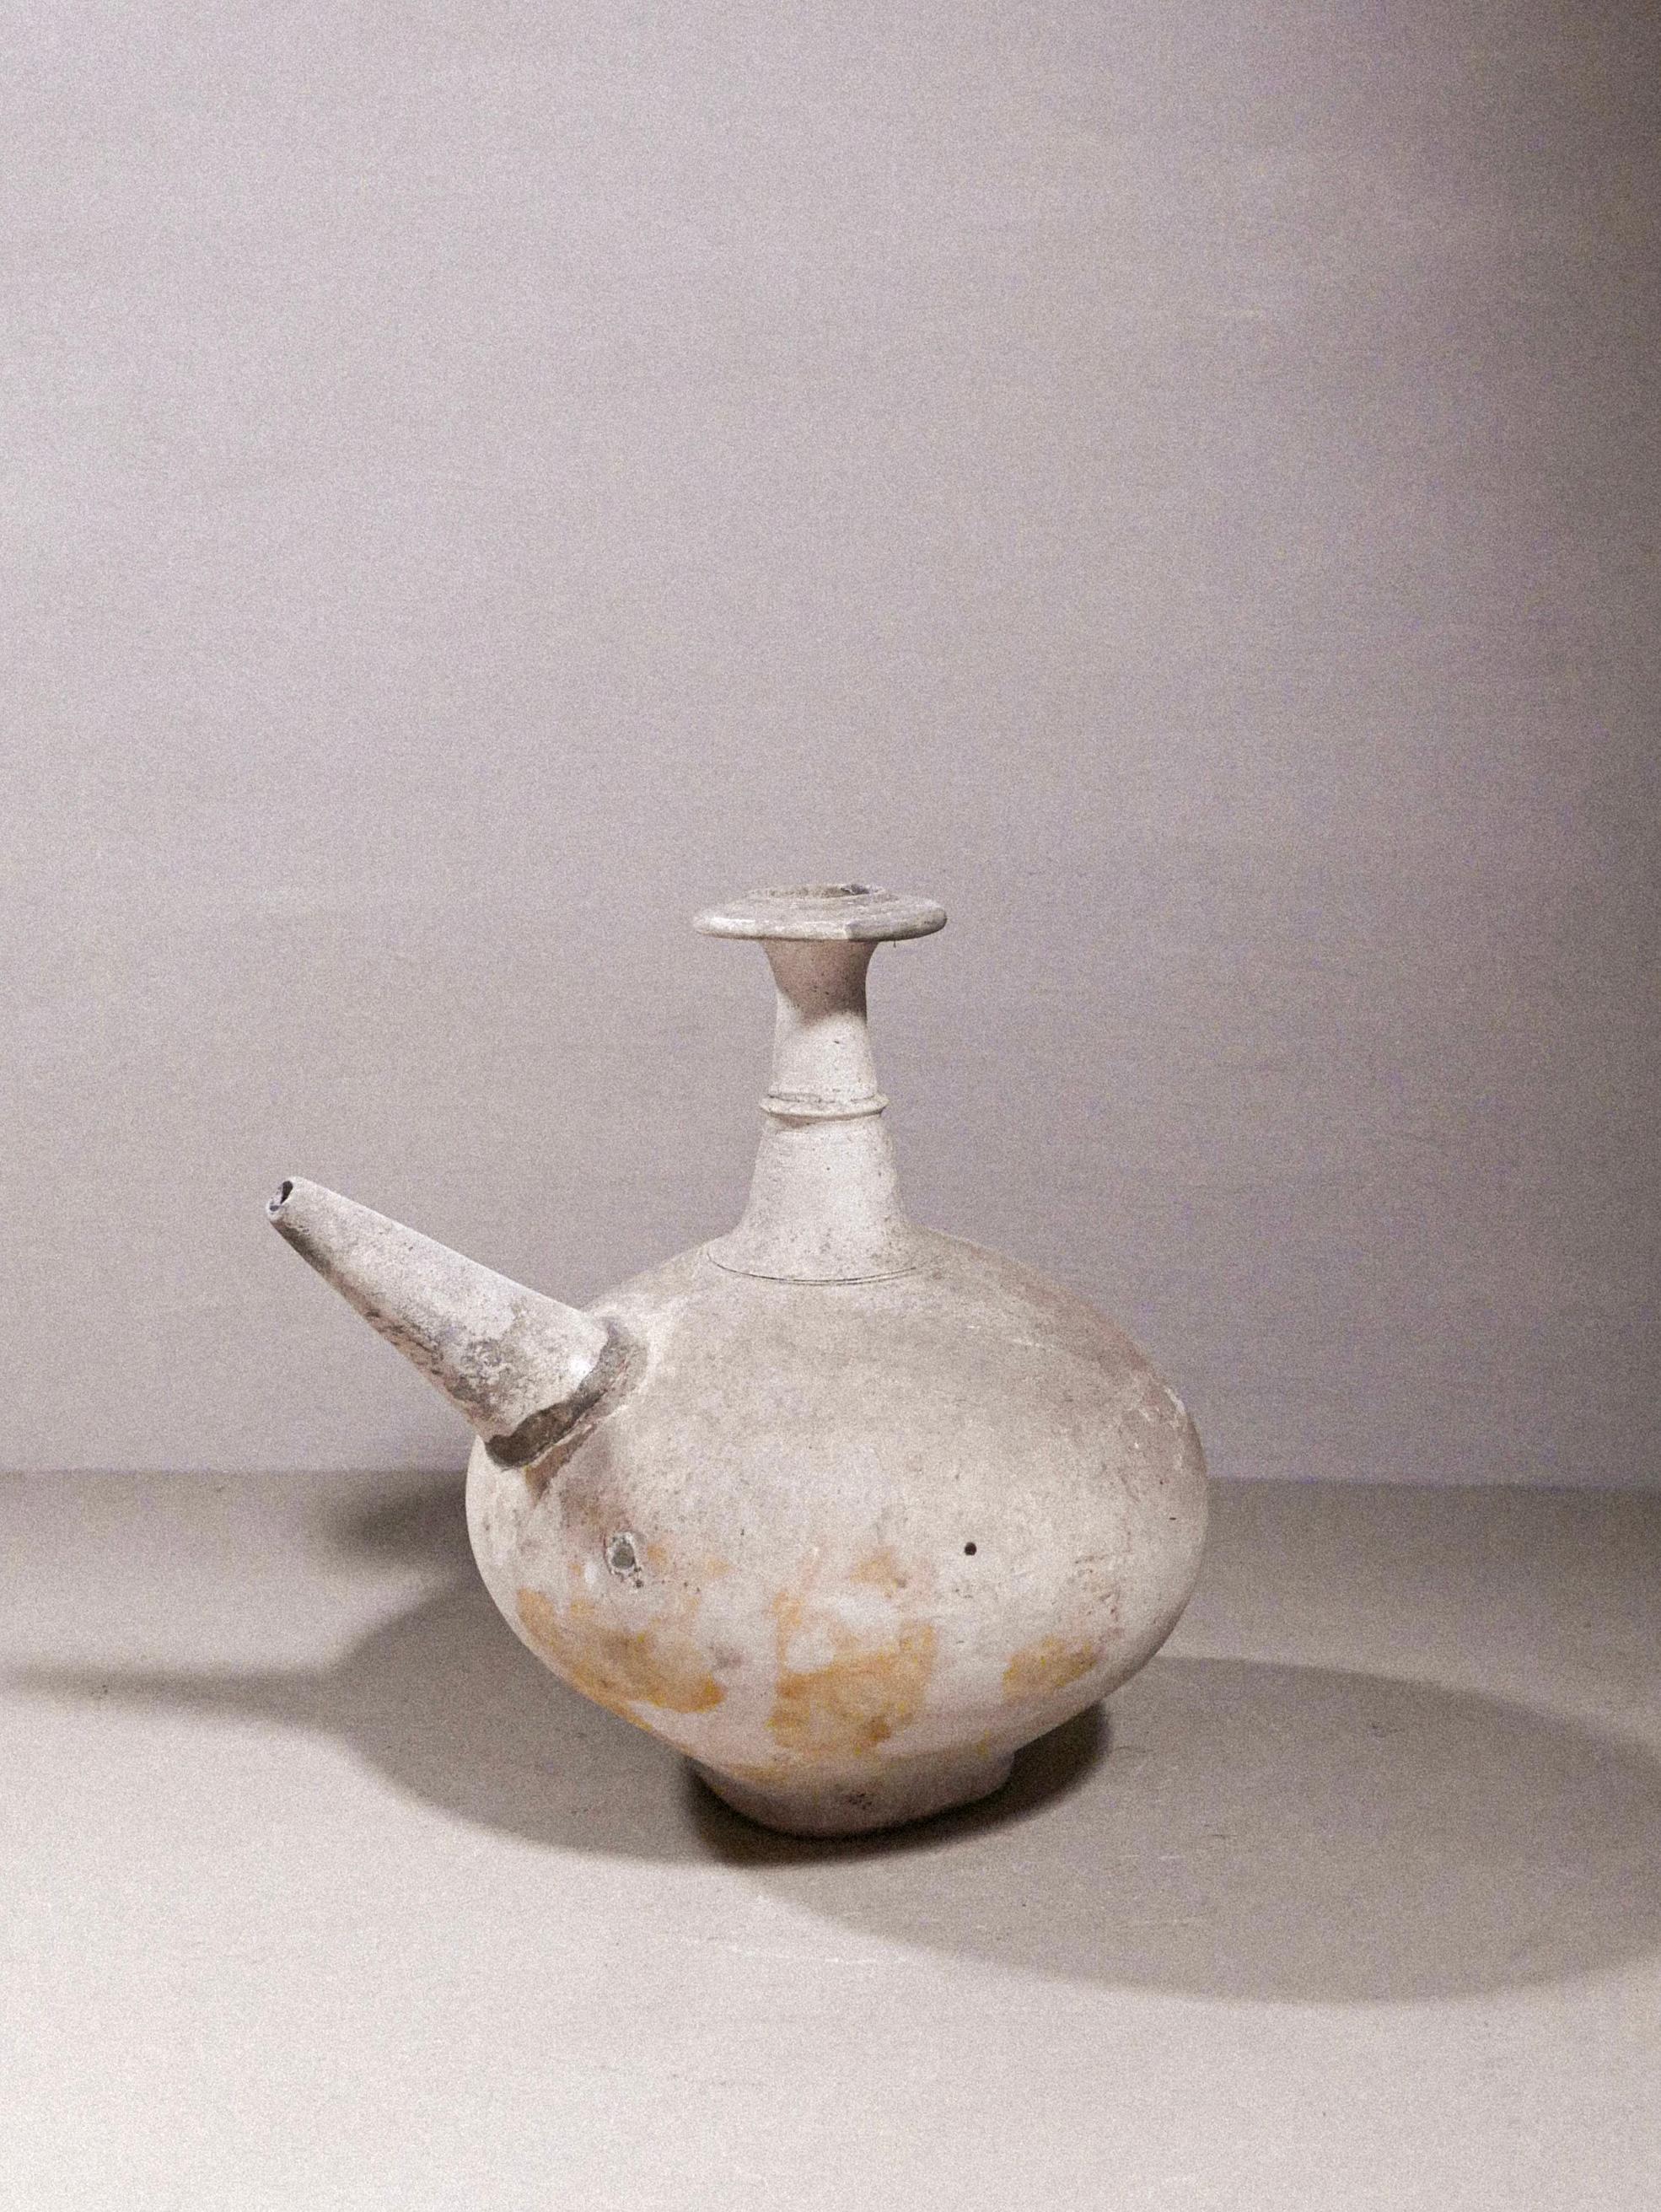 Earthenware holy water recipient from Java, Indonesia. The vessel is also known as “kendi”, and go back as far as the 13th-15th century, when some indigenous groups were still Christian. This period is referred to as the Majapahit Kingdom. They were